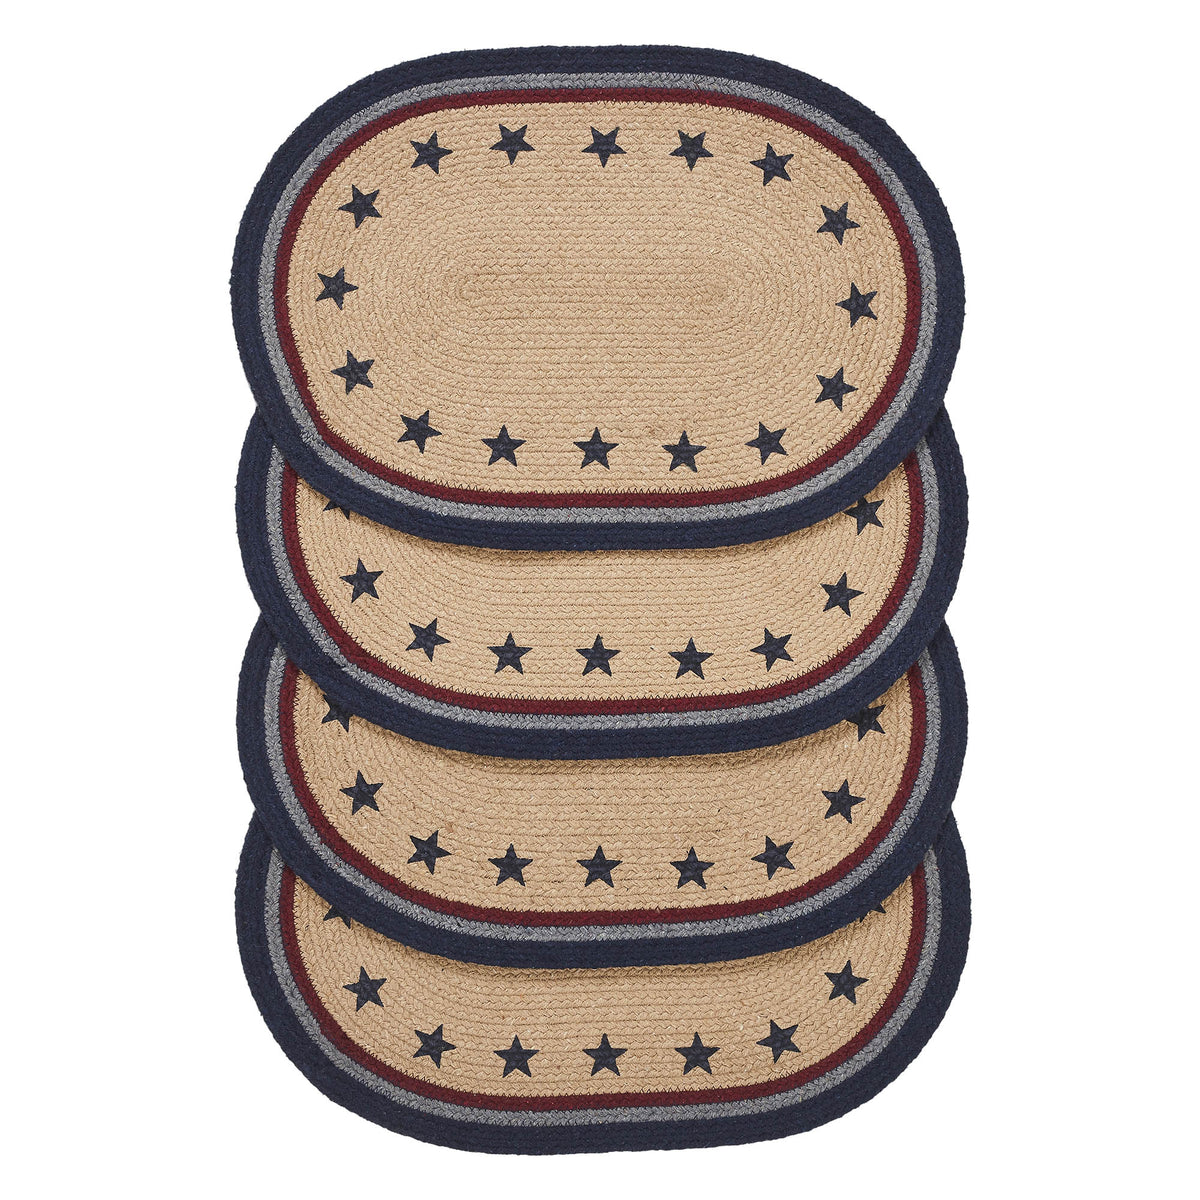 My Country Oval Placemat Stencil Stars Set of 4 13x19